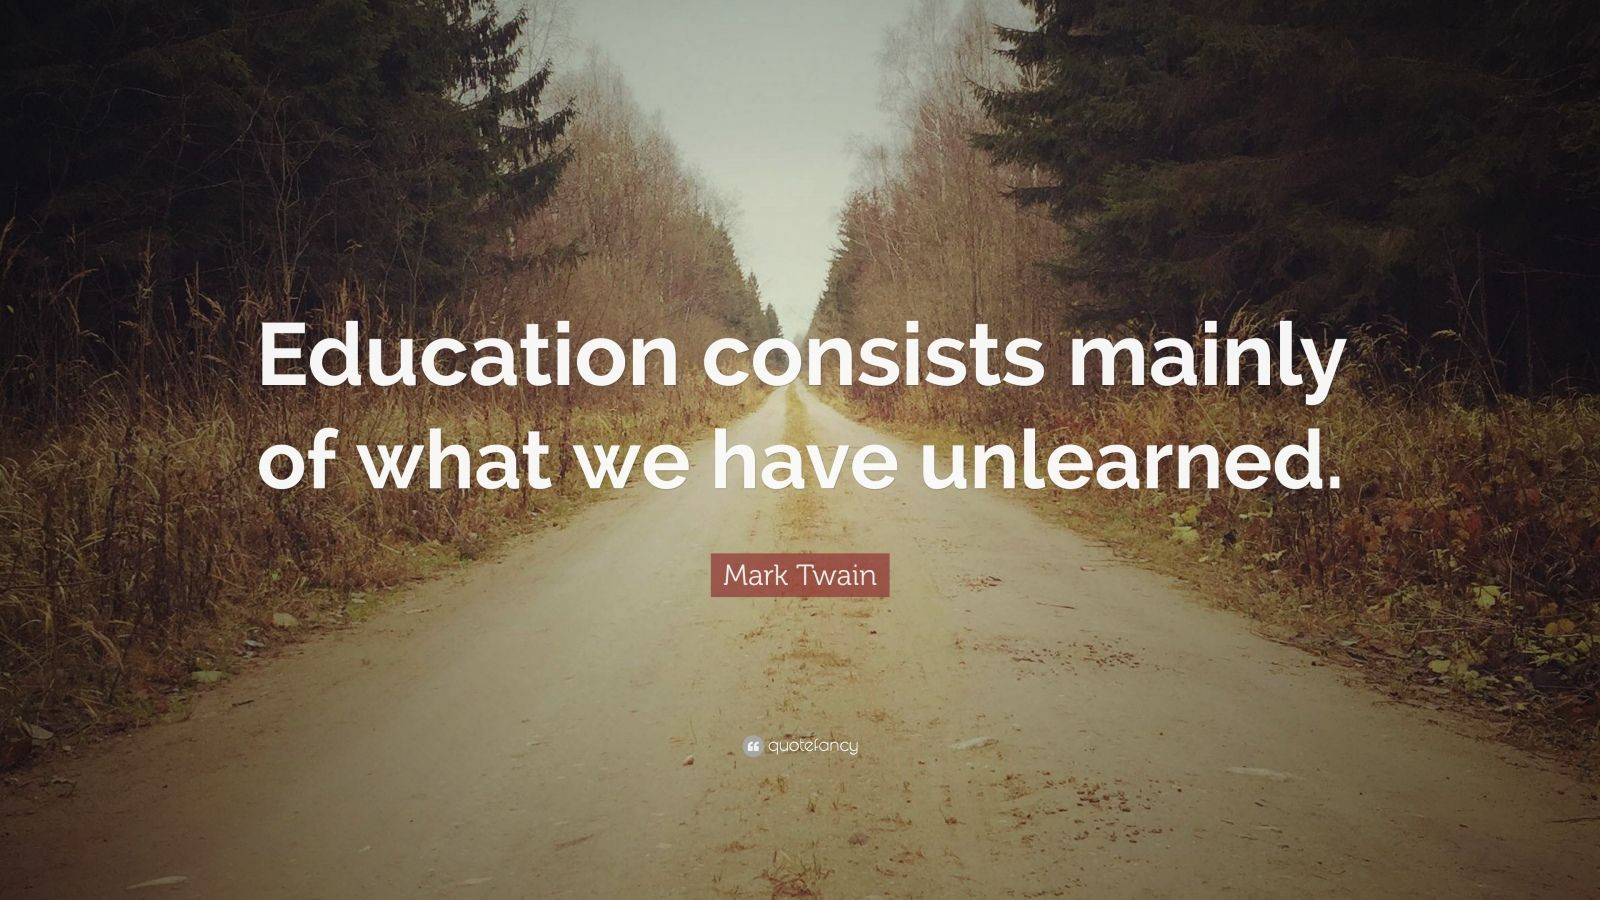 Mark Twain Education Quote
 Mark Twain Quote “Education consists mainly of what we